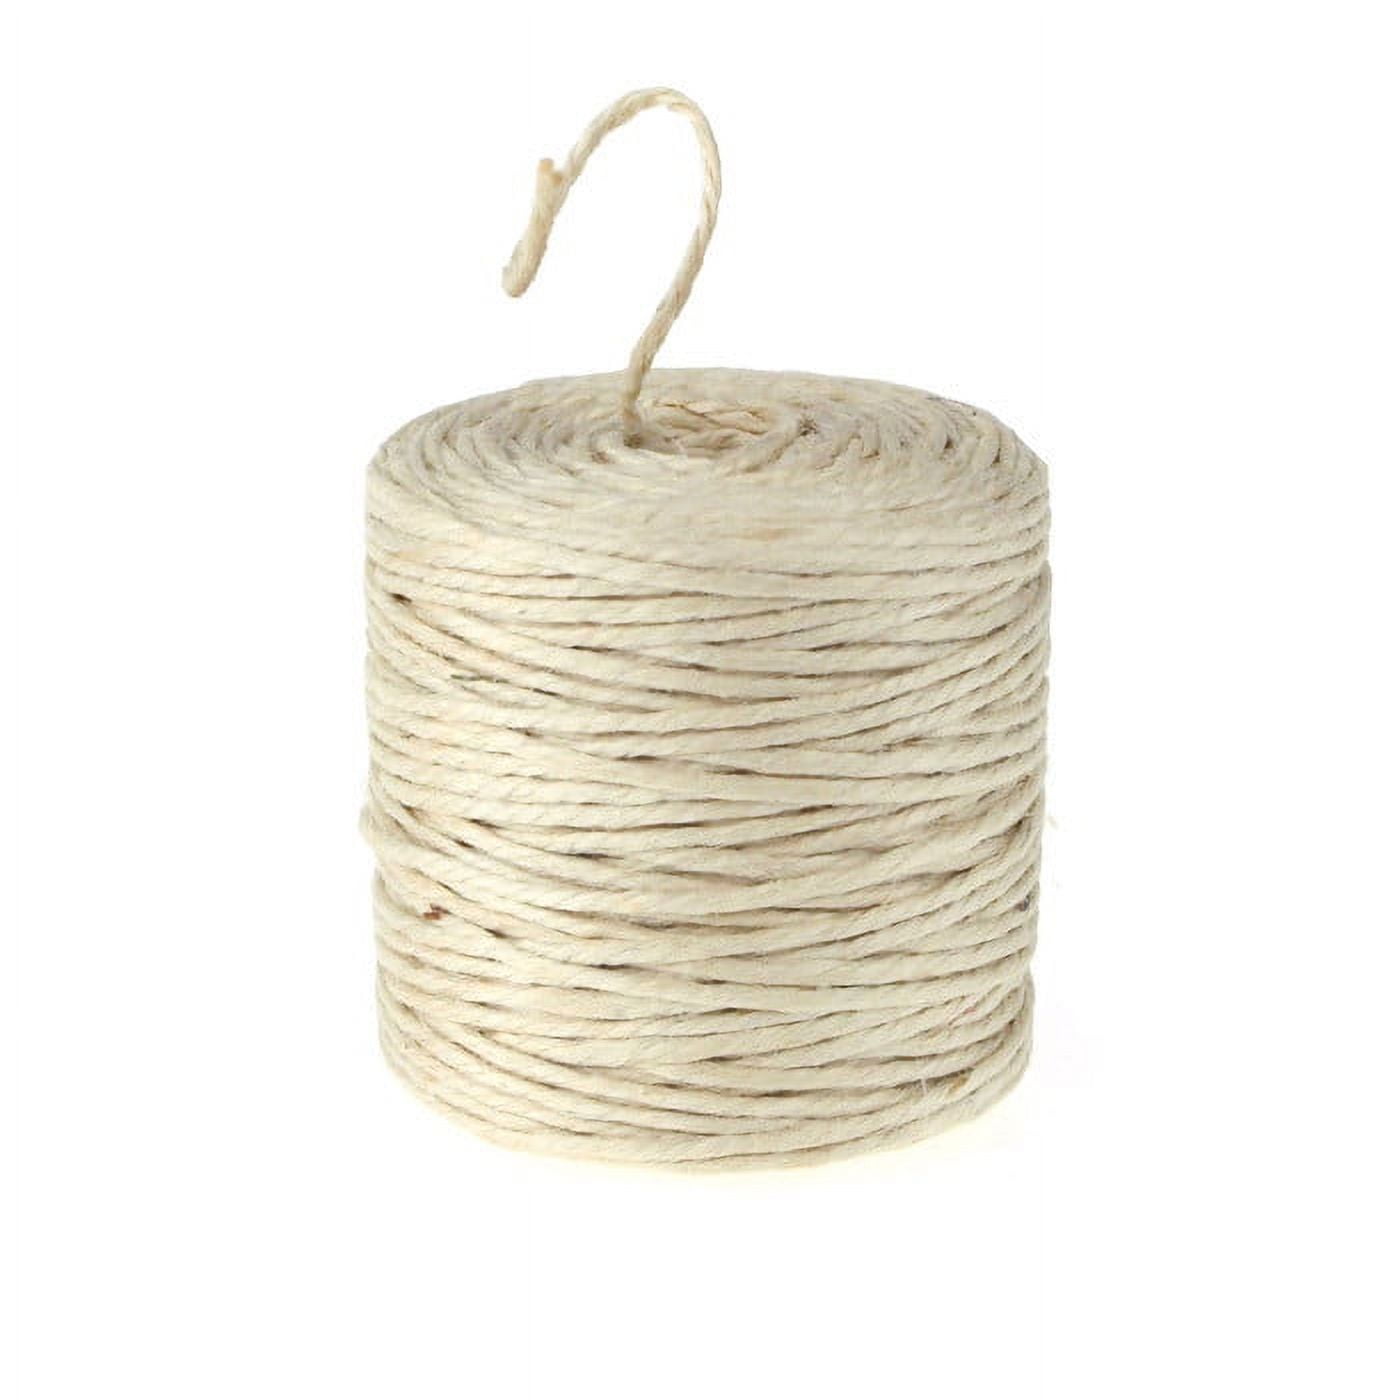 jijAcraft Jute Rope 1/3 inch, 33 Feet x 8mm Thick Jute Rope, Nautical Rope,  Heavy Duty Strong Jute Twine, Natural Thick Twine Rope for Crafts, Cat